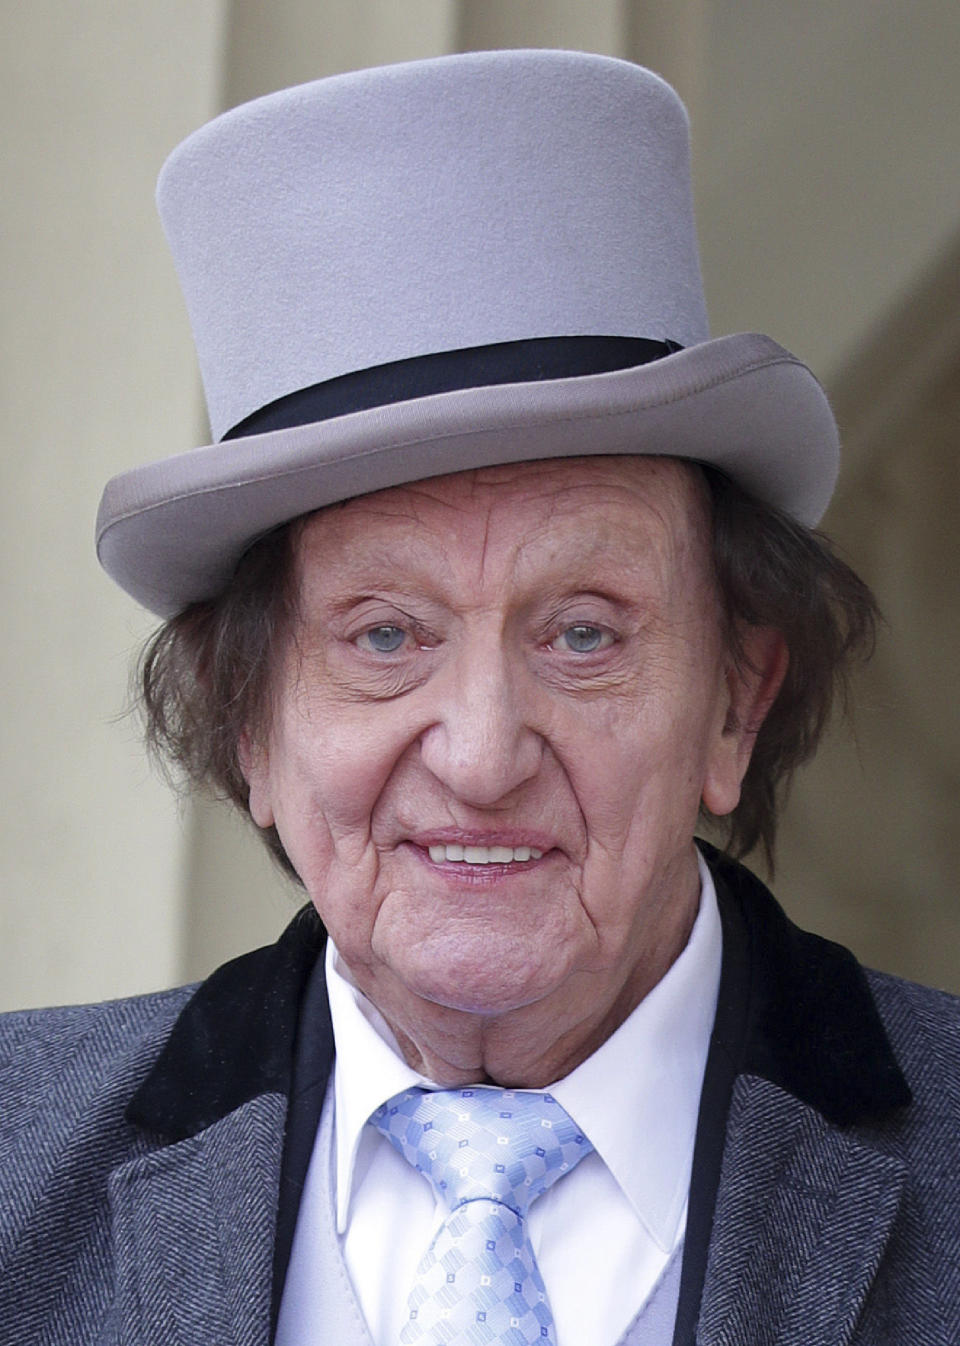 &lt;strong&gt;Ken Dodd&lt;/strong&gt;&lt;br /&gt;&lt;strong&gt;Comedian and Entertainer&amp;nbsp;(b. 1927)&amp;nbsp;&lt;/strong&gt;&lt;br /&gt;&lt;br /&gt;The National Treasure, famous for his epic stand-up shows, as well as his Diddy Men and tickling stick, &lt;a href=&quot;http://www.huffingtonpost.co.uk/entry/ken-dodd-dead_uk_5aa5d78fe4b07047bec7c405&quot;&gt;died just days after leaving hospital&lt;/a&gt;. He married Anne Jones, his partner of 40 years,&amp;nbsp;just two days before he passed away.